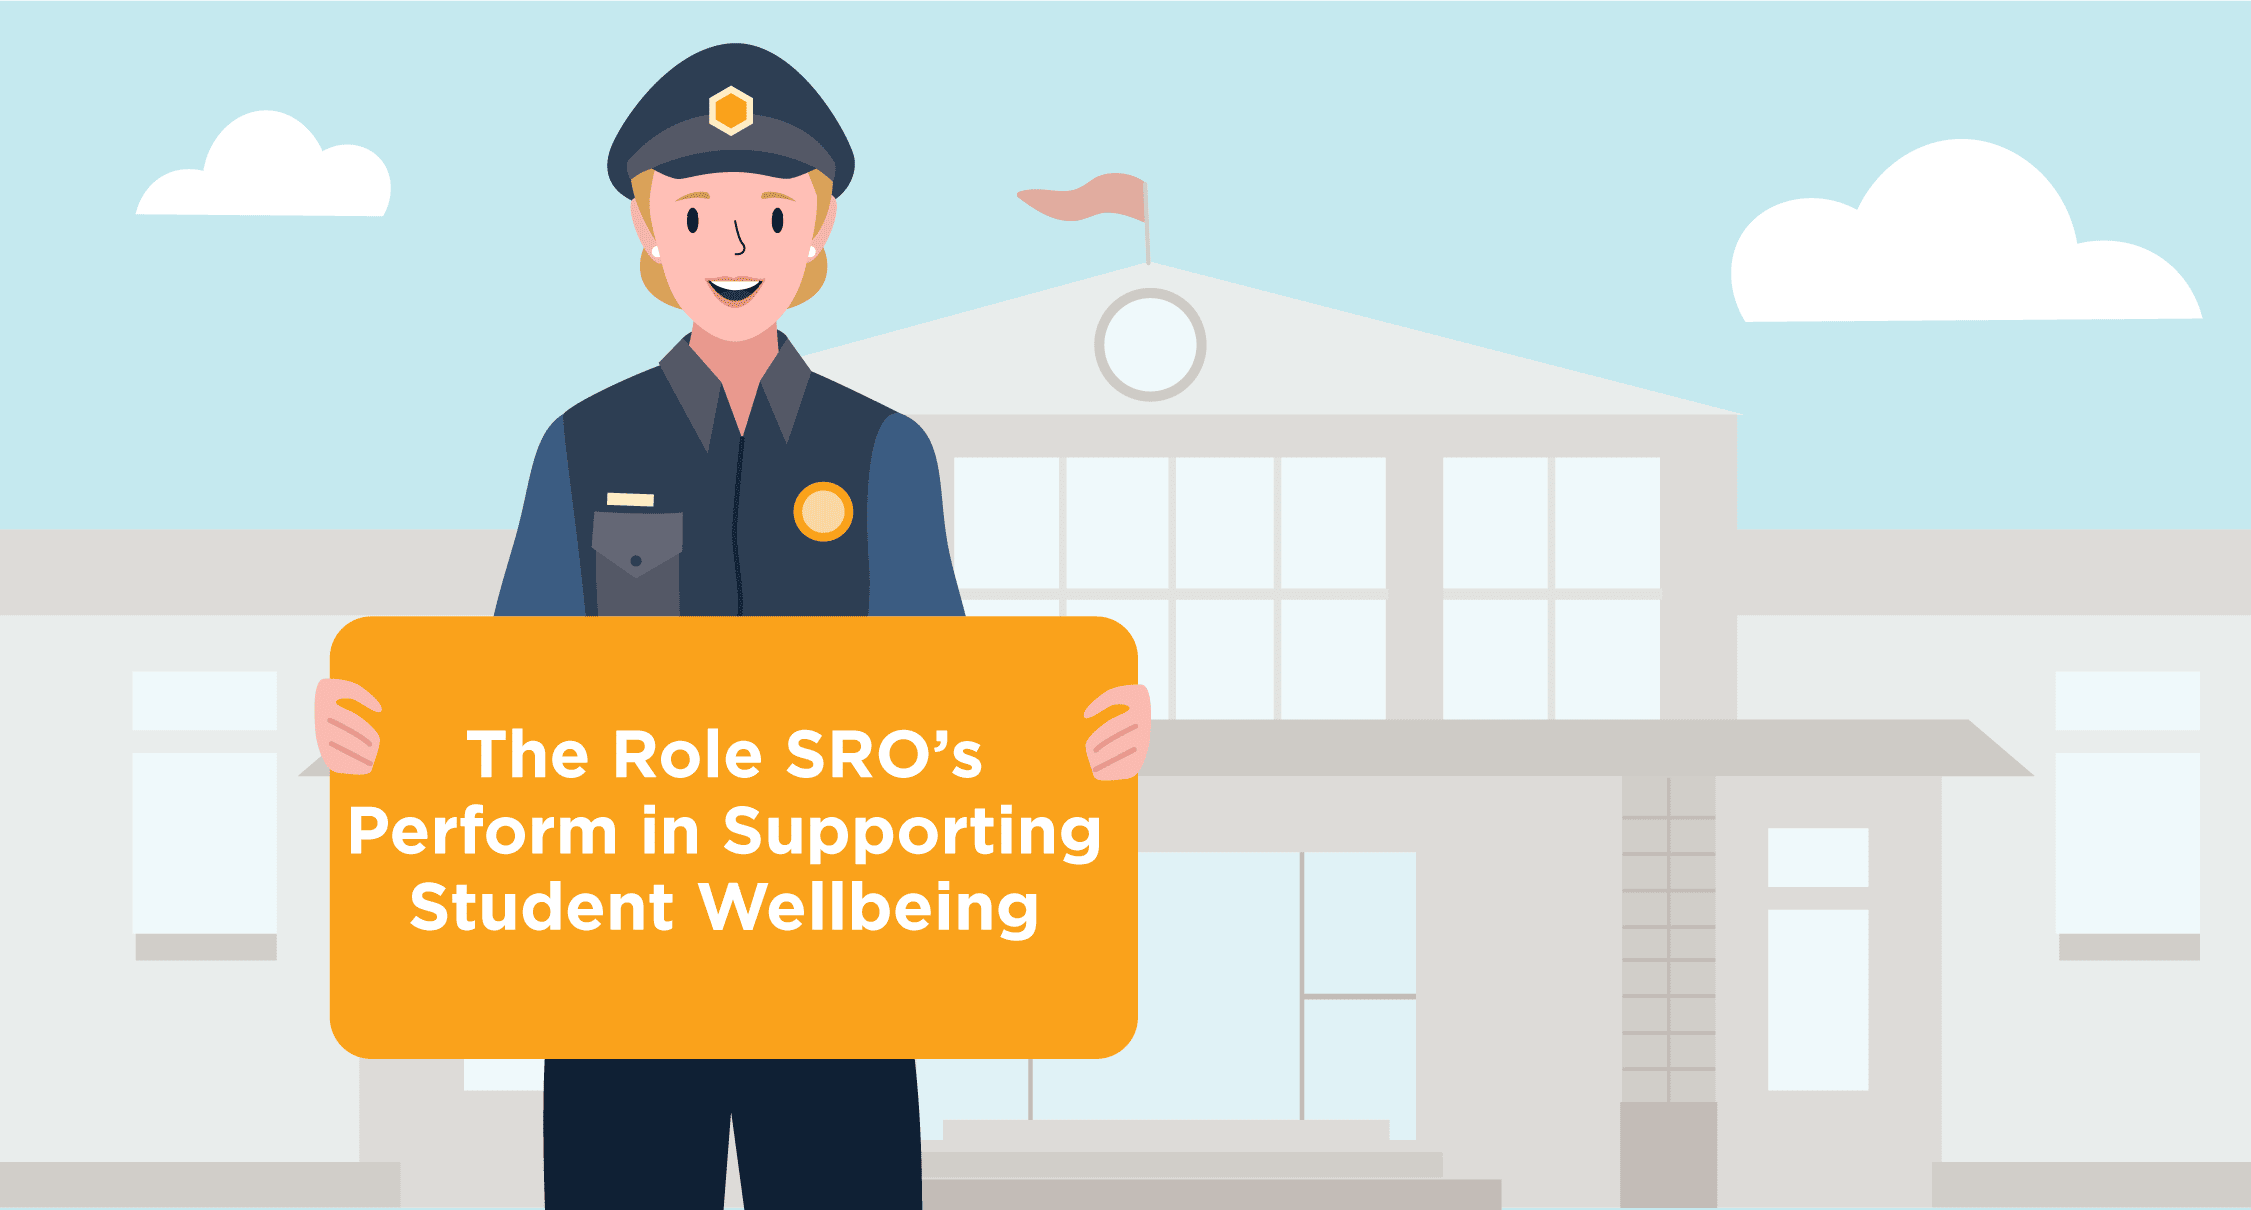 SRO roles in student wellbeing